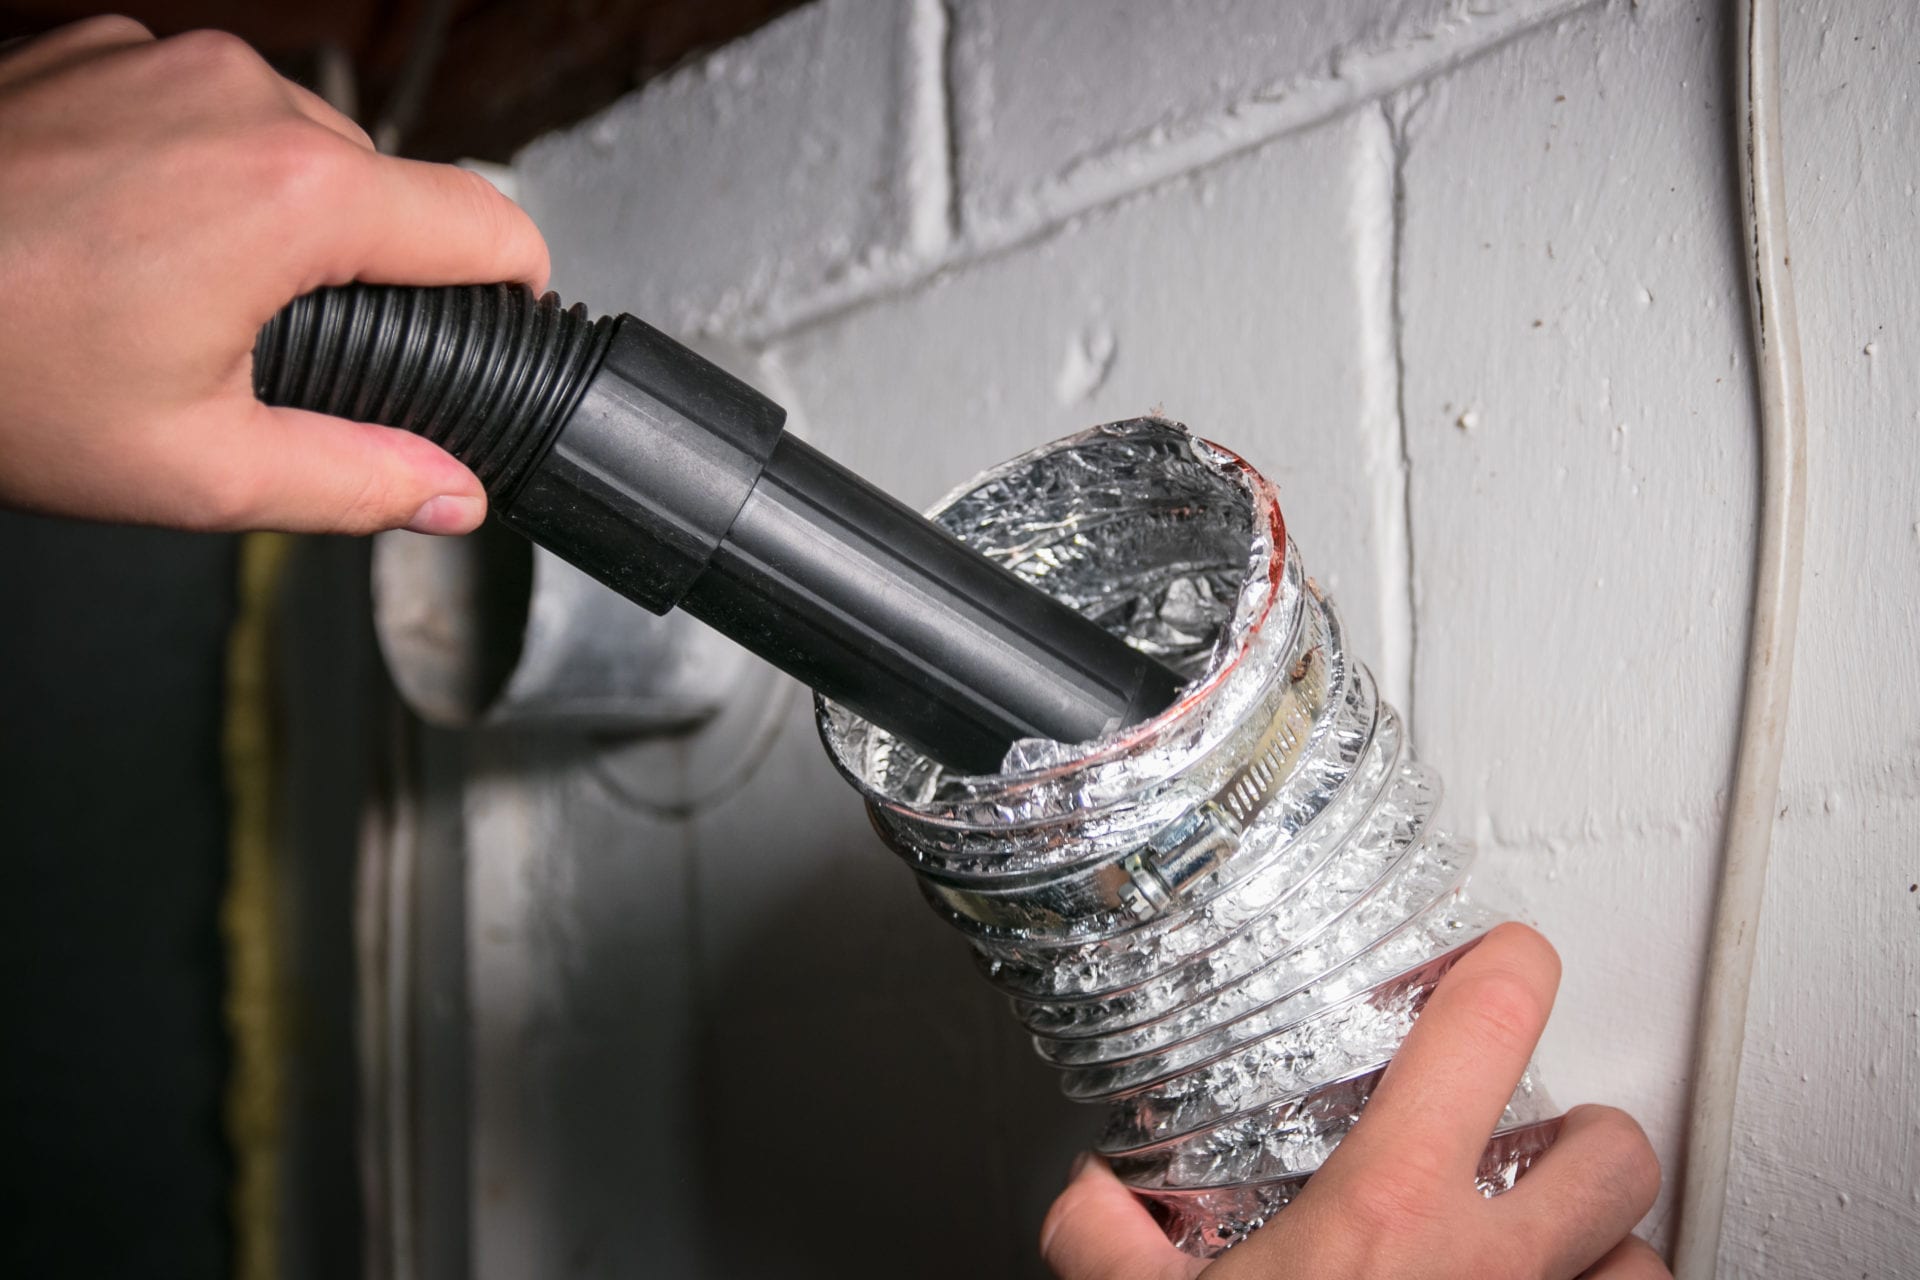 Dryer Vent Cleaning In Austin, Texas